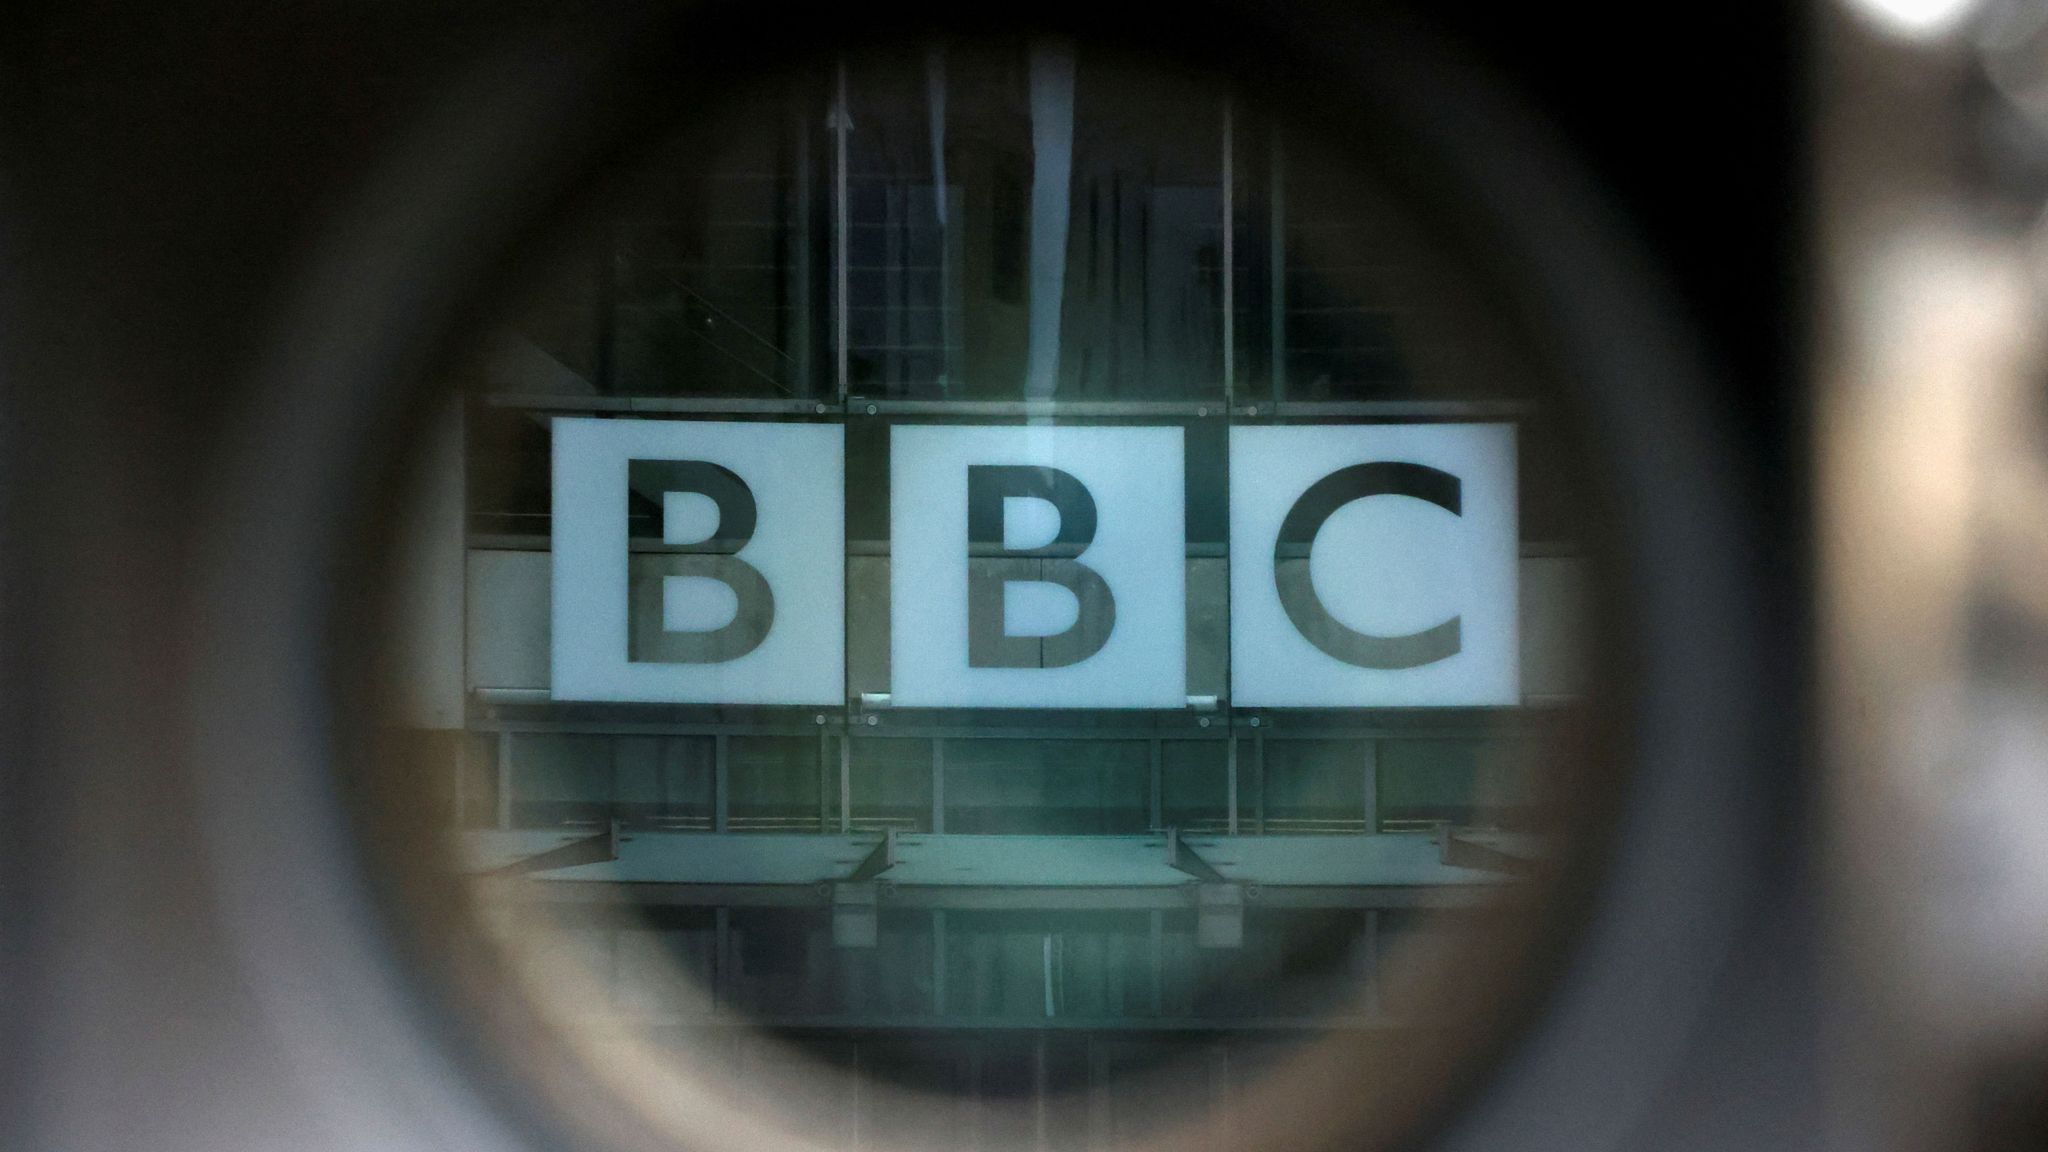 BBC presenter scandal is sleazy and depressing